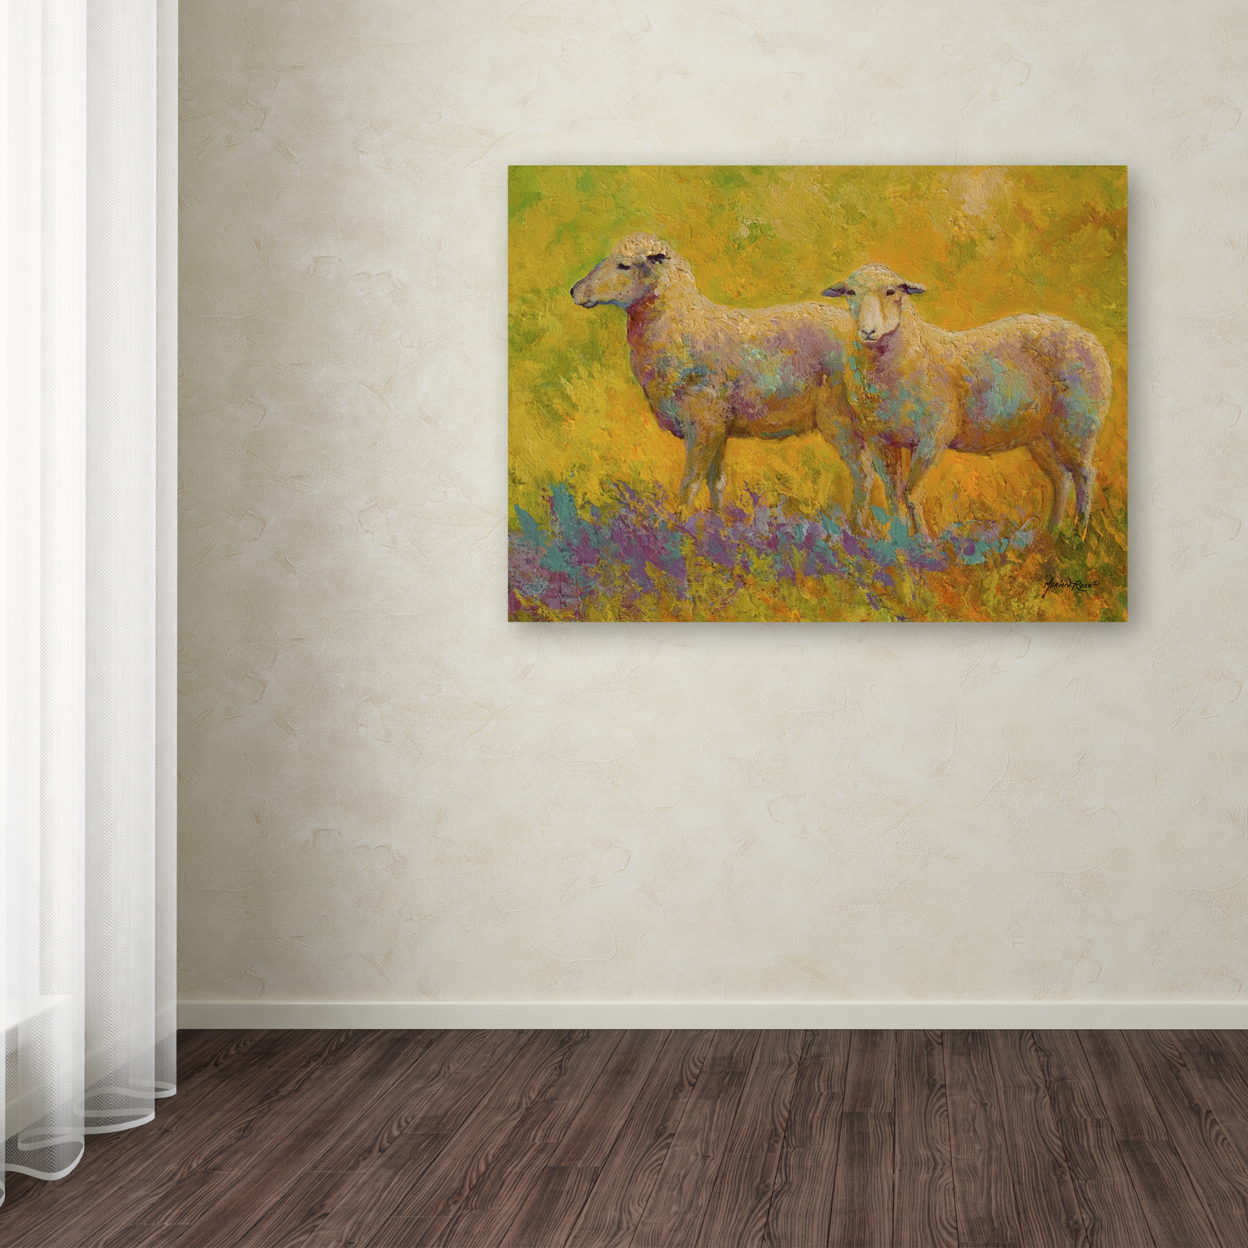 Marion Rose 'Warm Glow Sheep Pair' Ready To Hang Canvas Art 24 X 32 Inches Made In USA